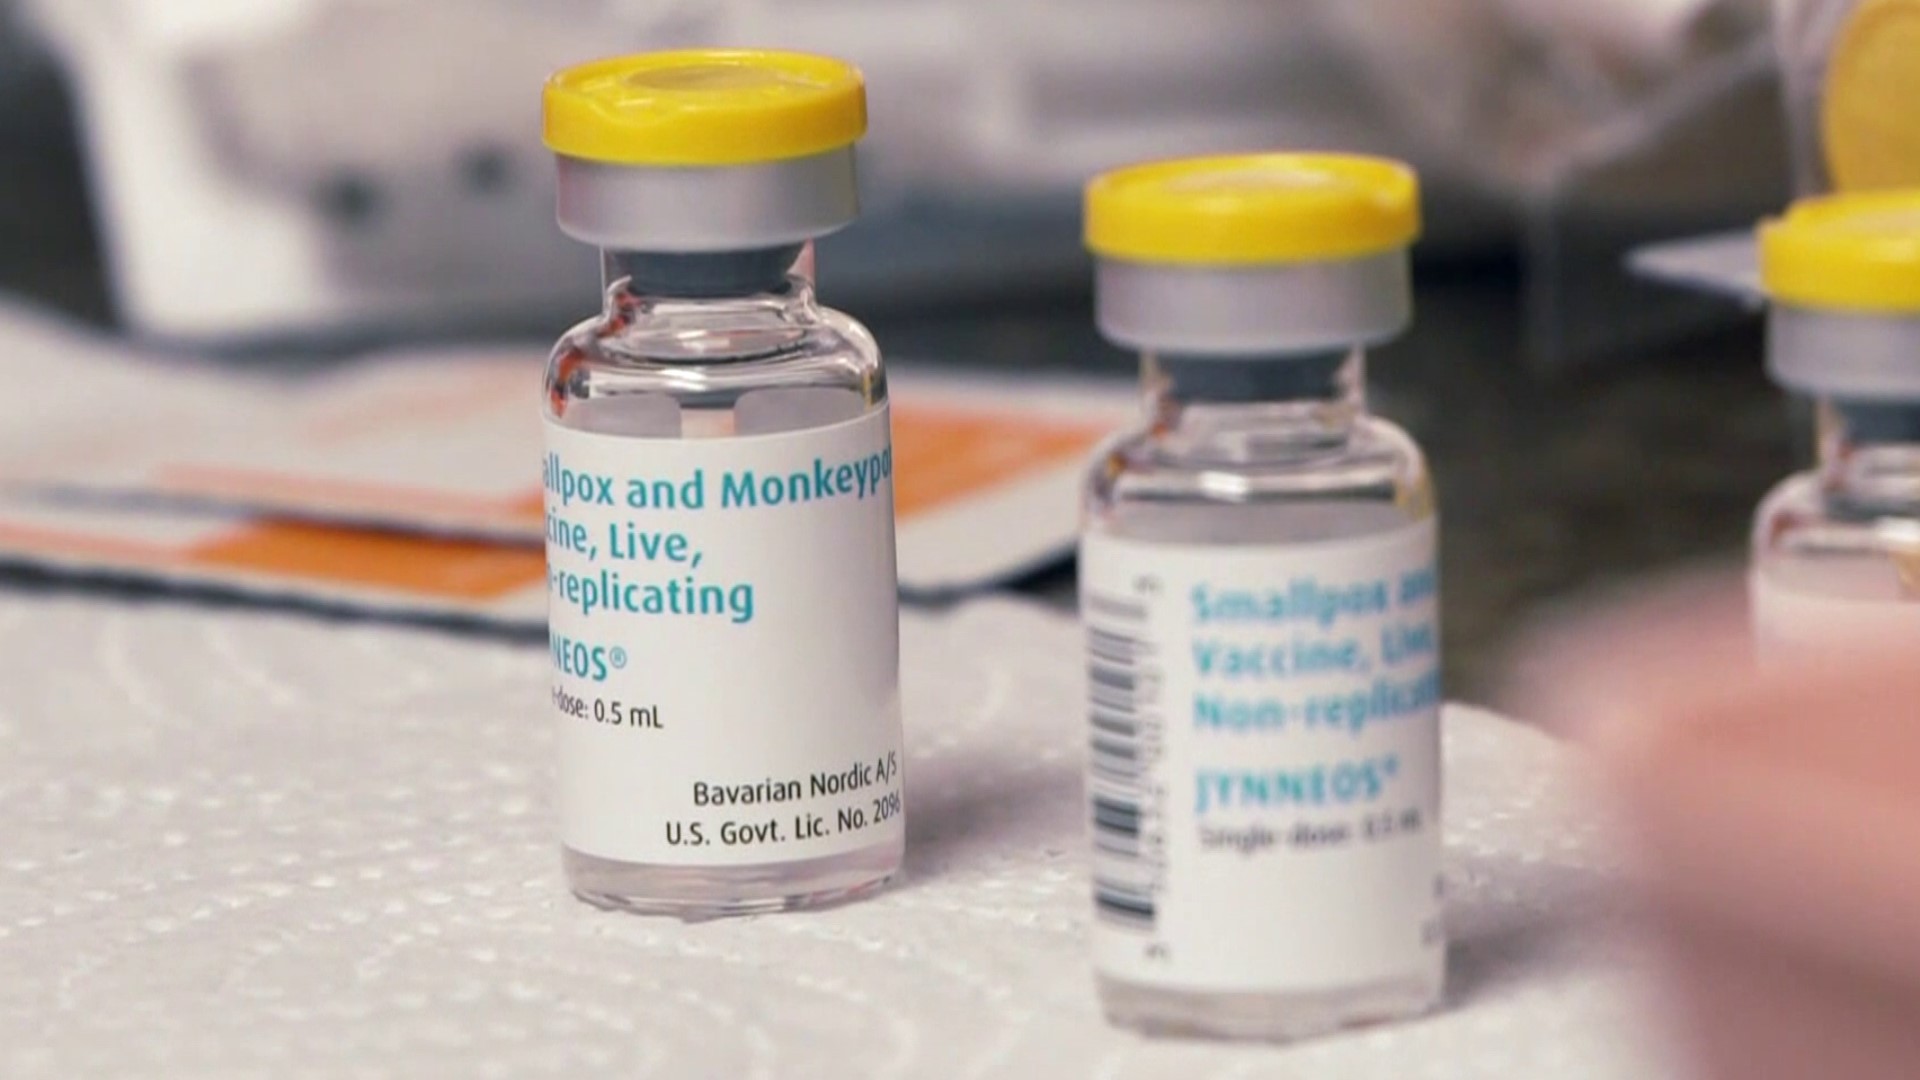 With 15 confirmed cases of Monkeypox in Arkansas, three locations in NWA will offer the monkeypox vaccine by the end of the week.